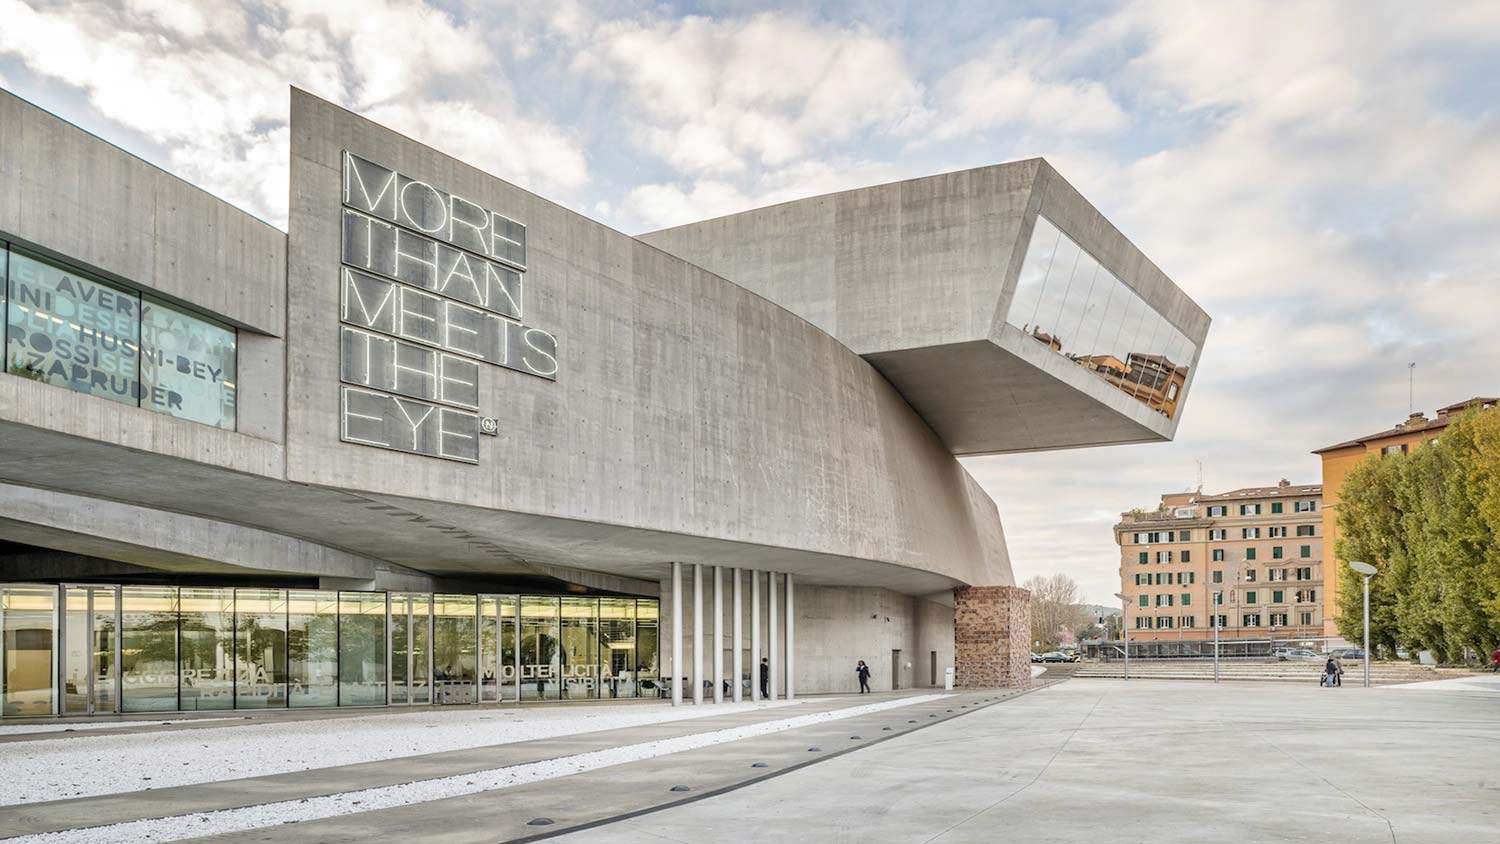 The MAXXI in Rome, Art within Art.